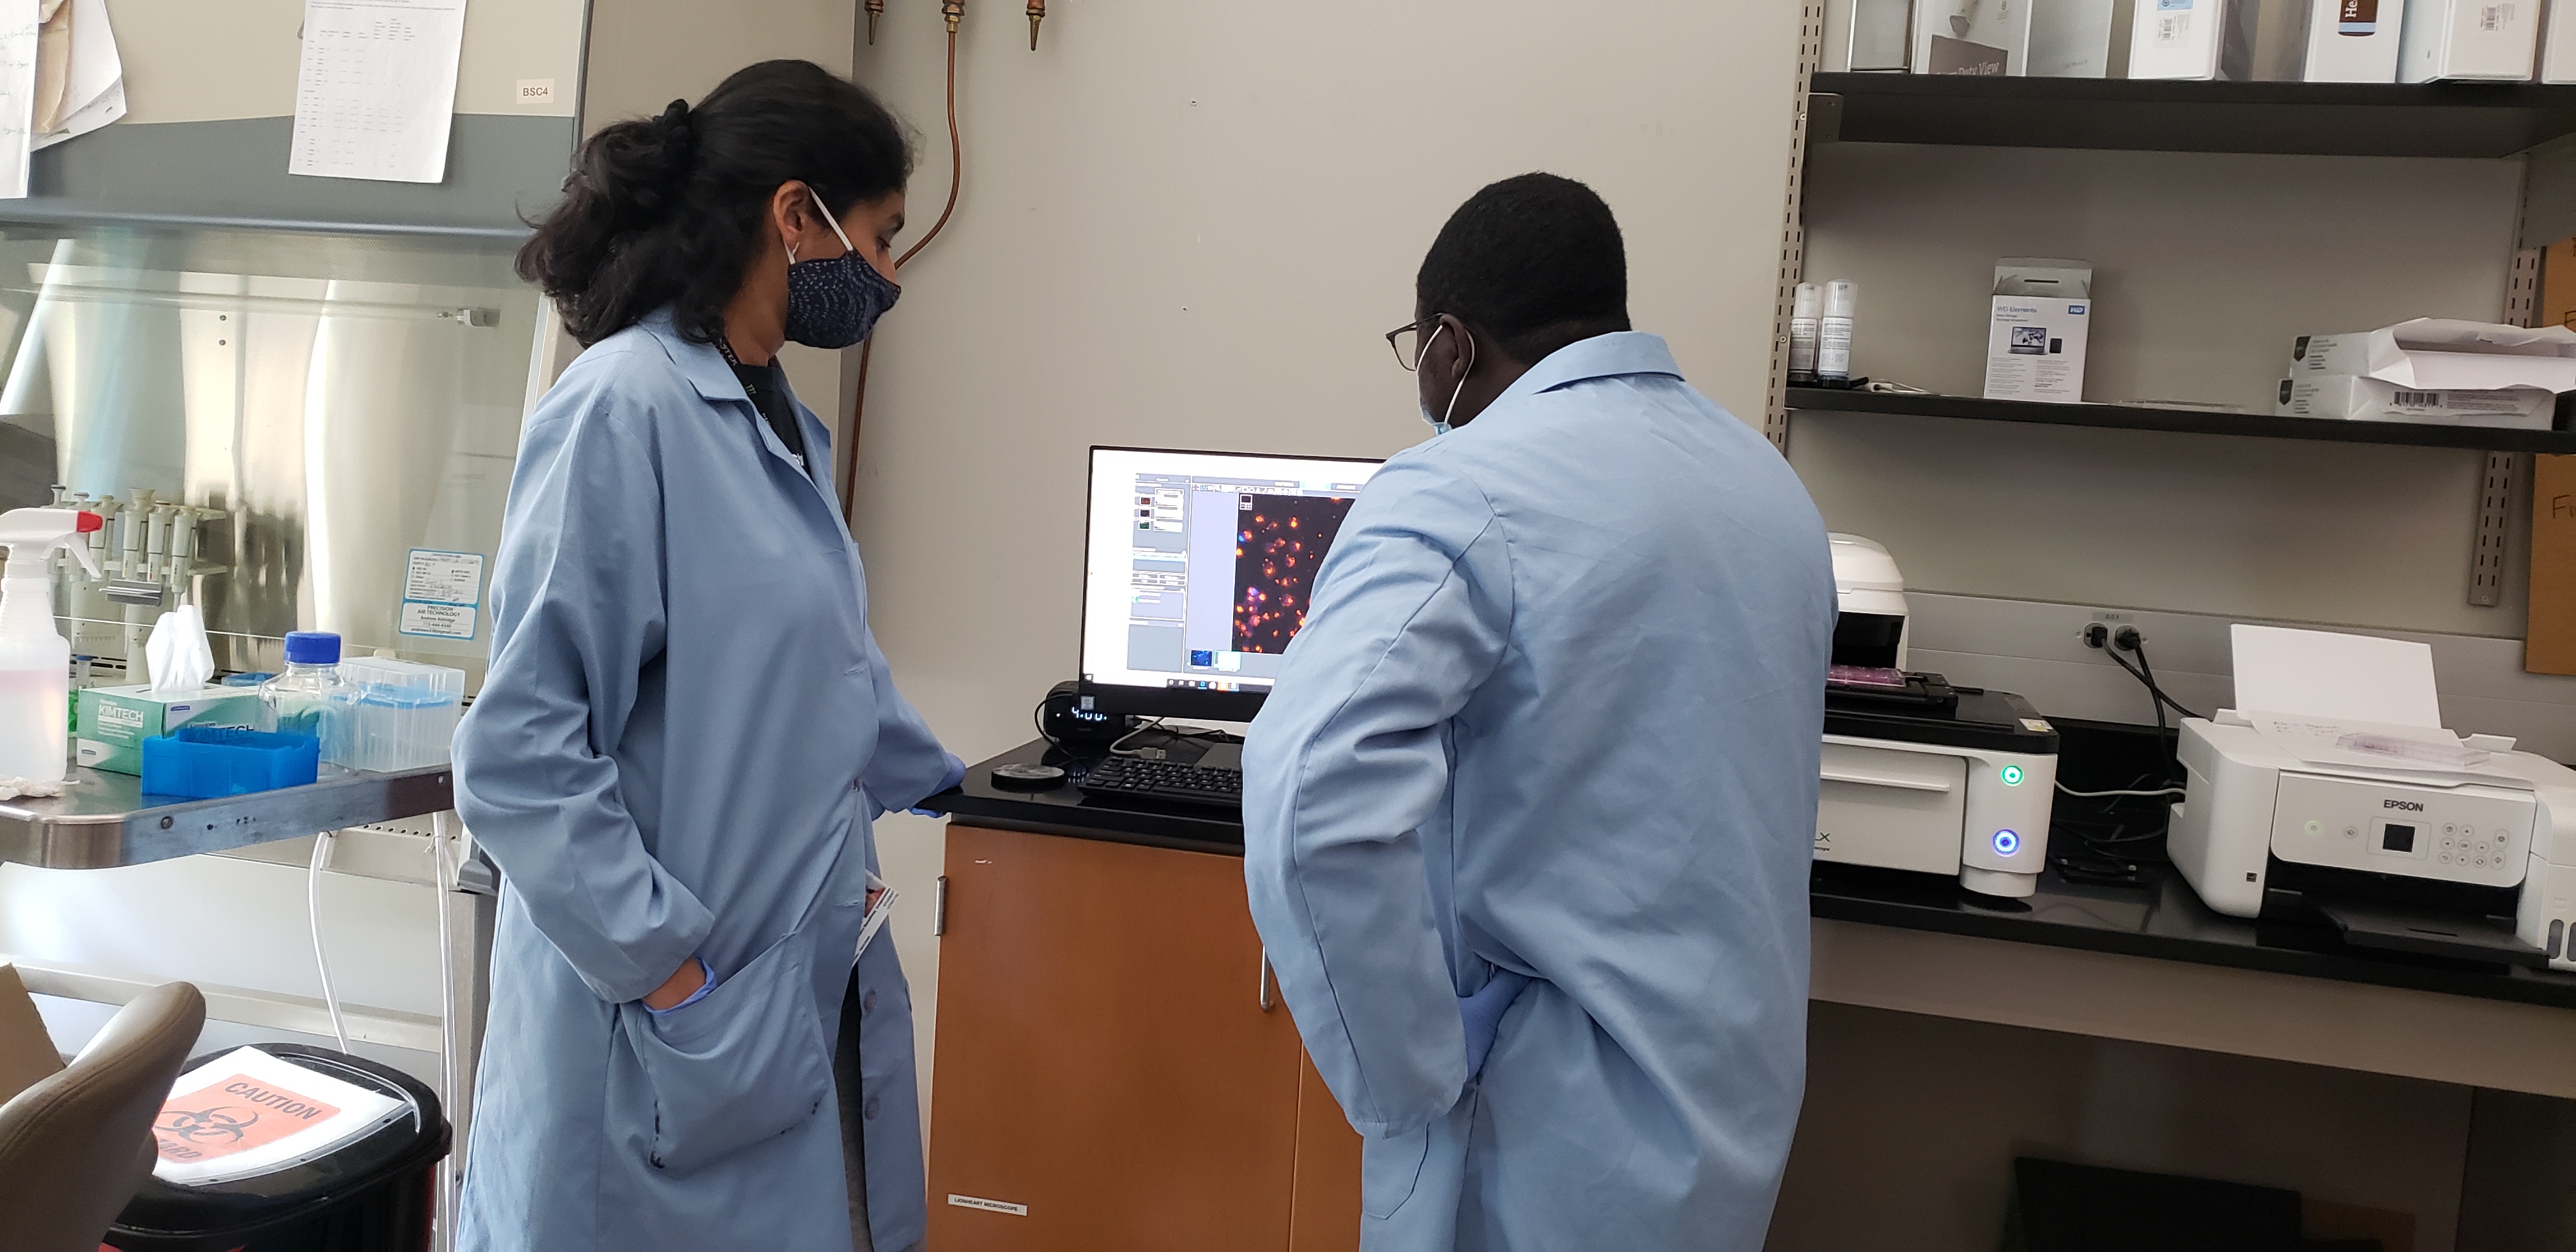 A professor and student discuss cell images in the lab